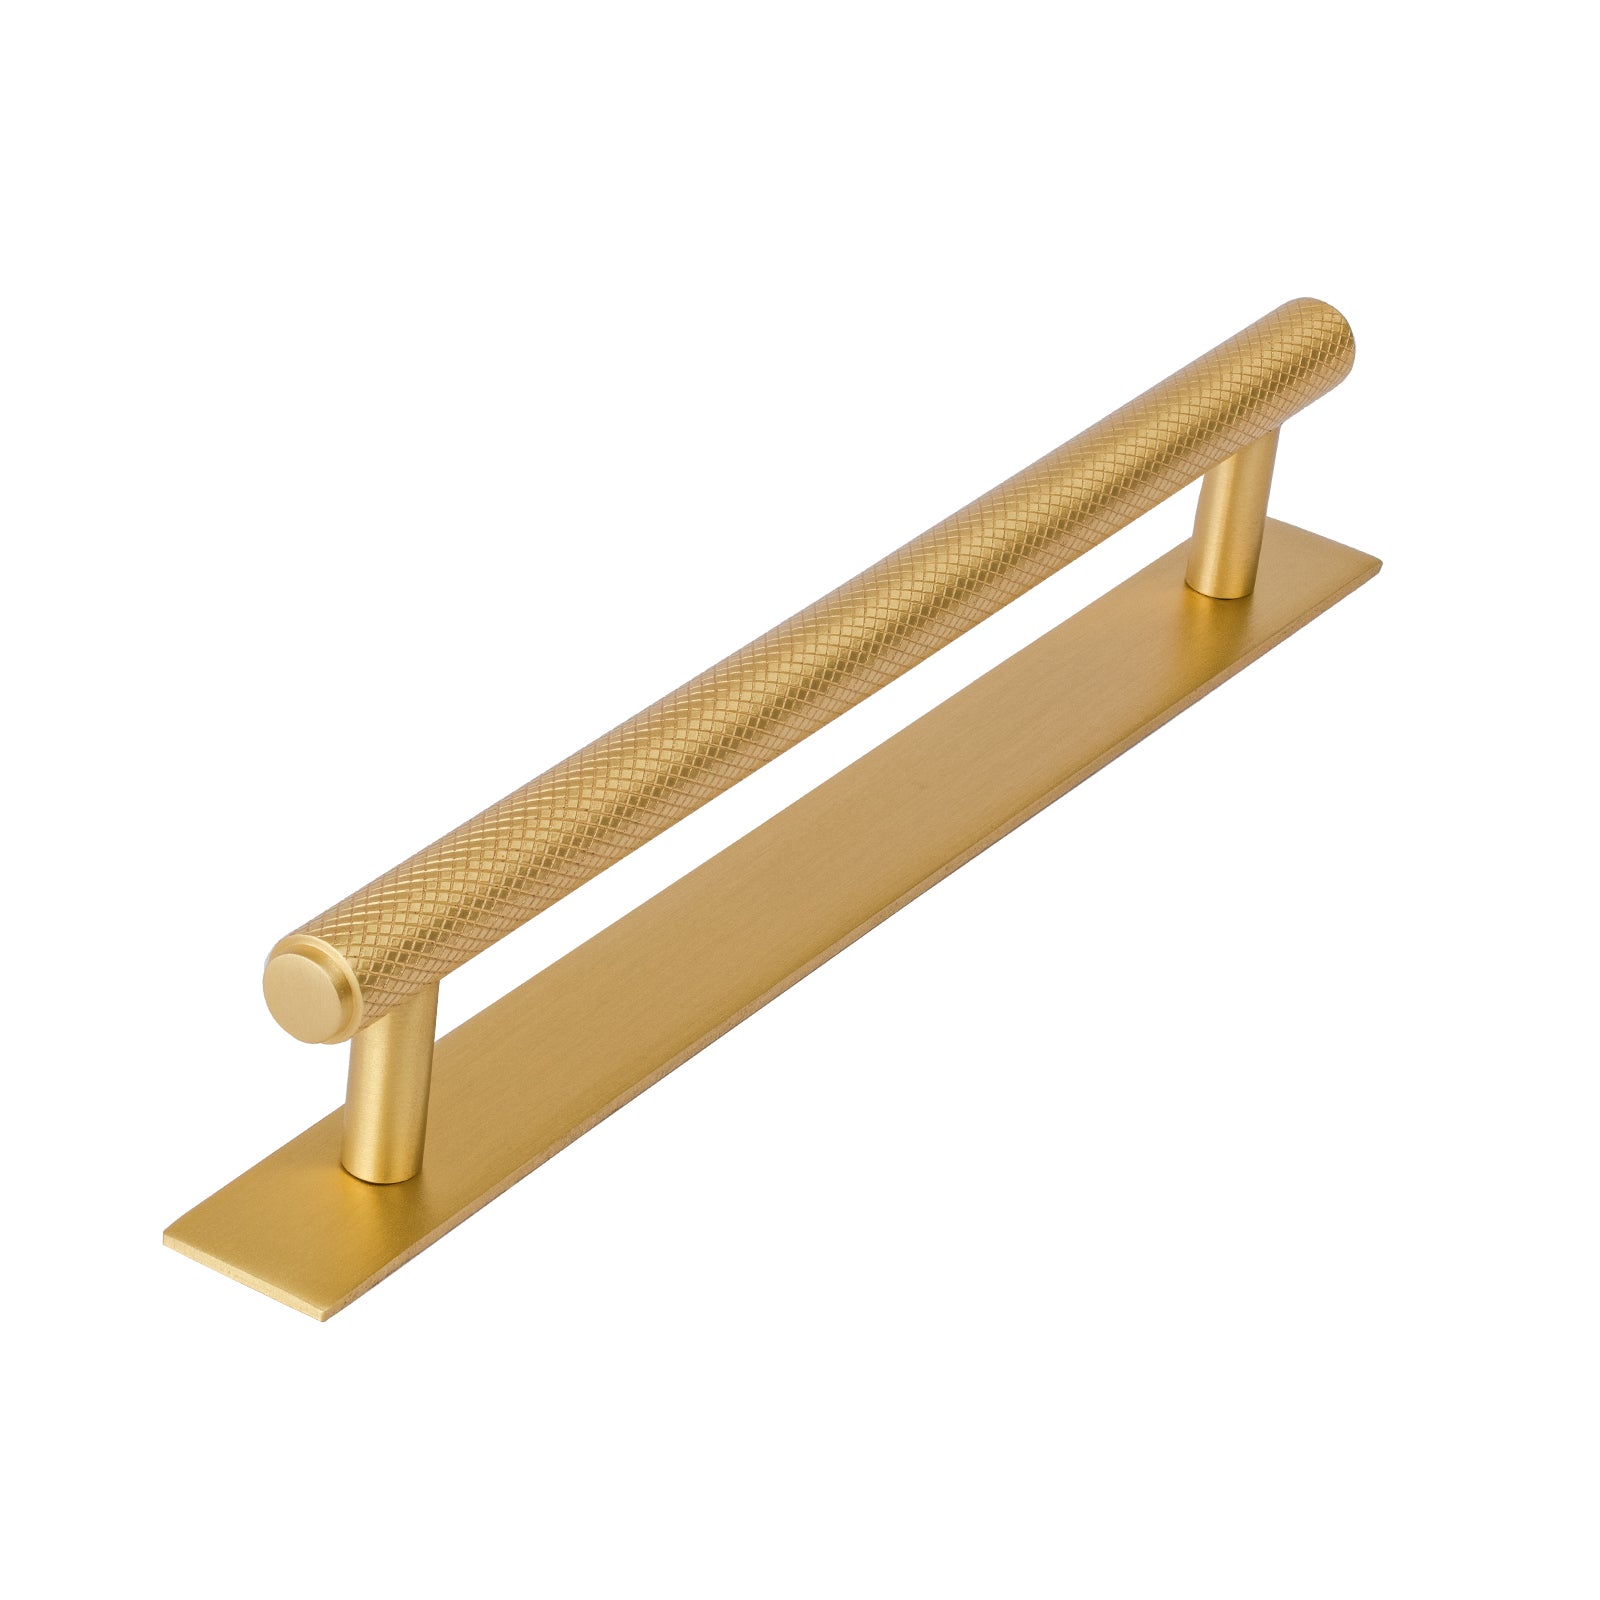 satin brass cupboard handles, large knurled pull handle, kitchen pull handles on backplate